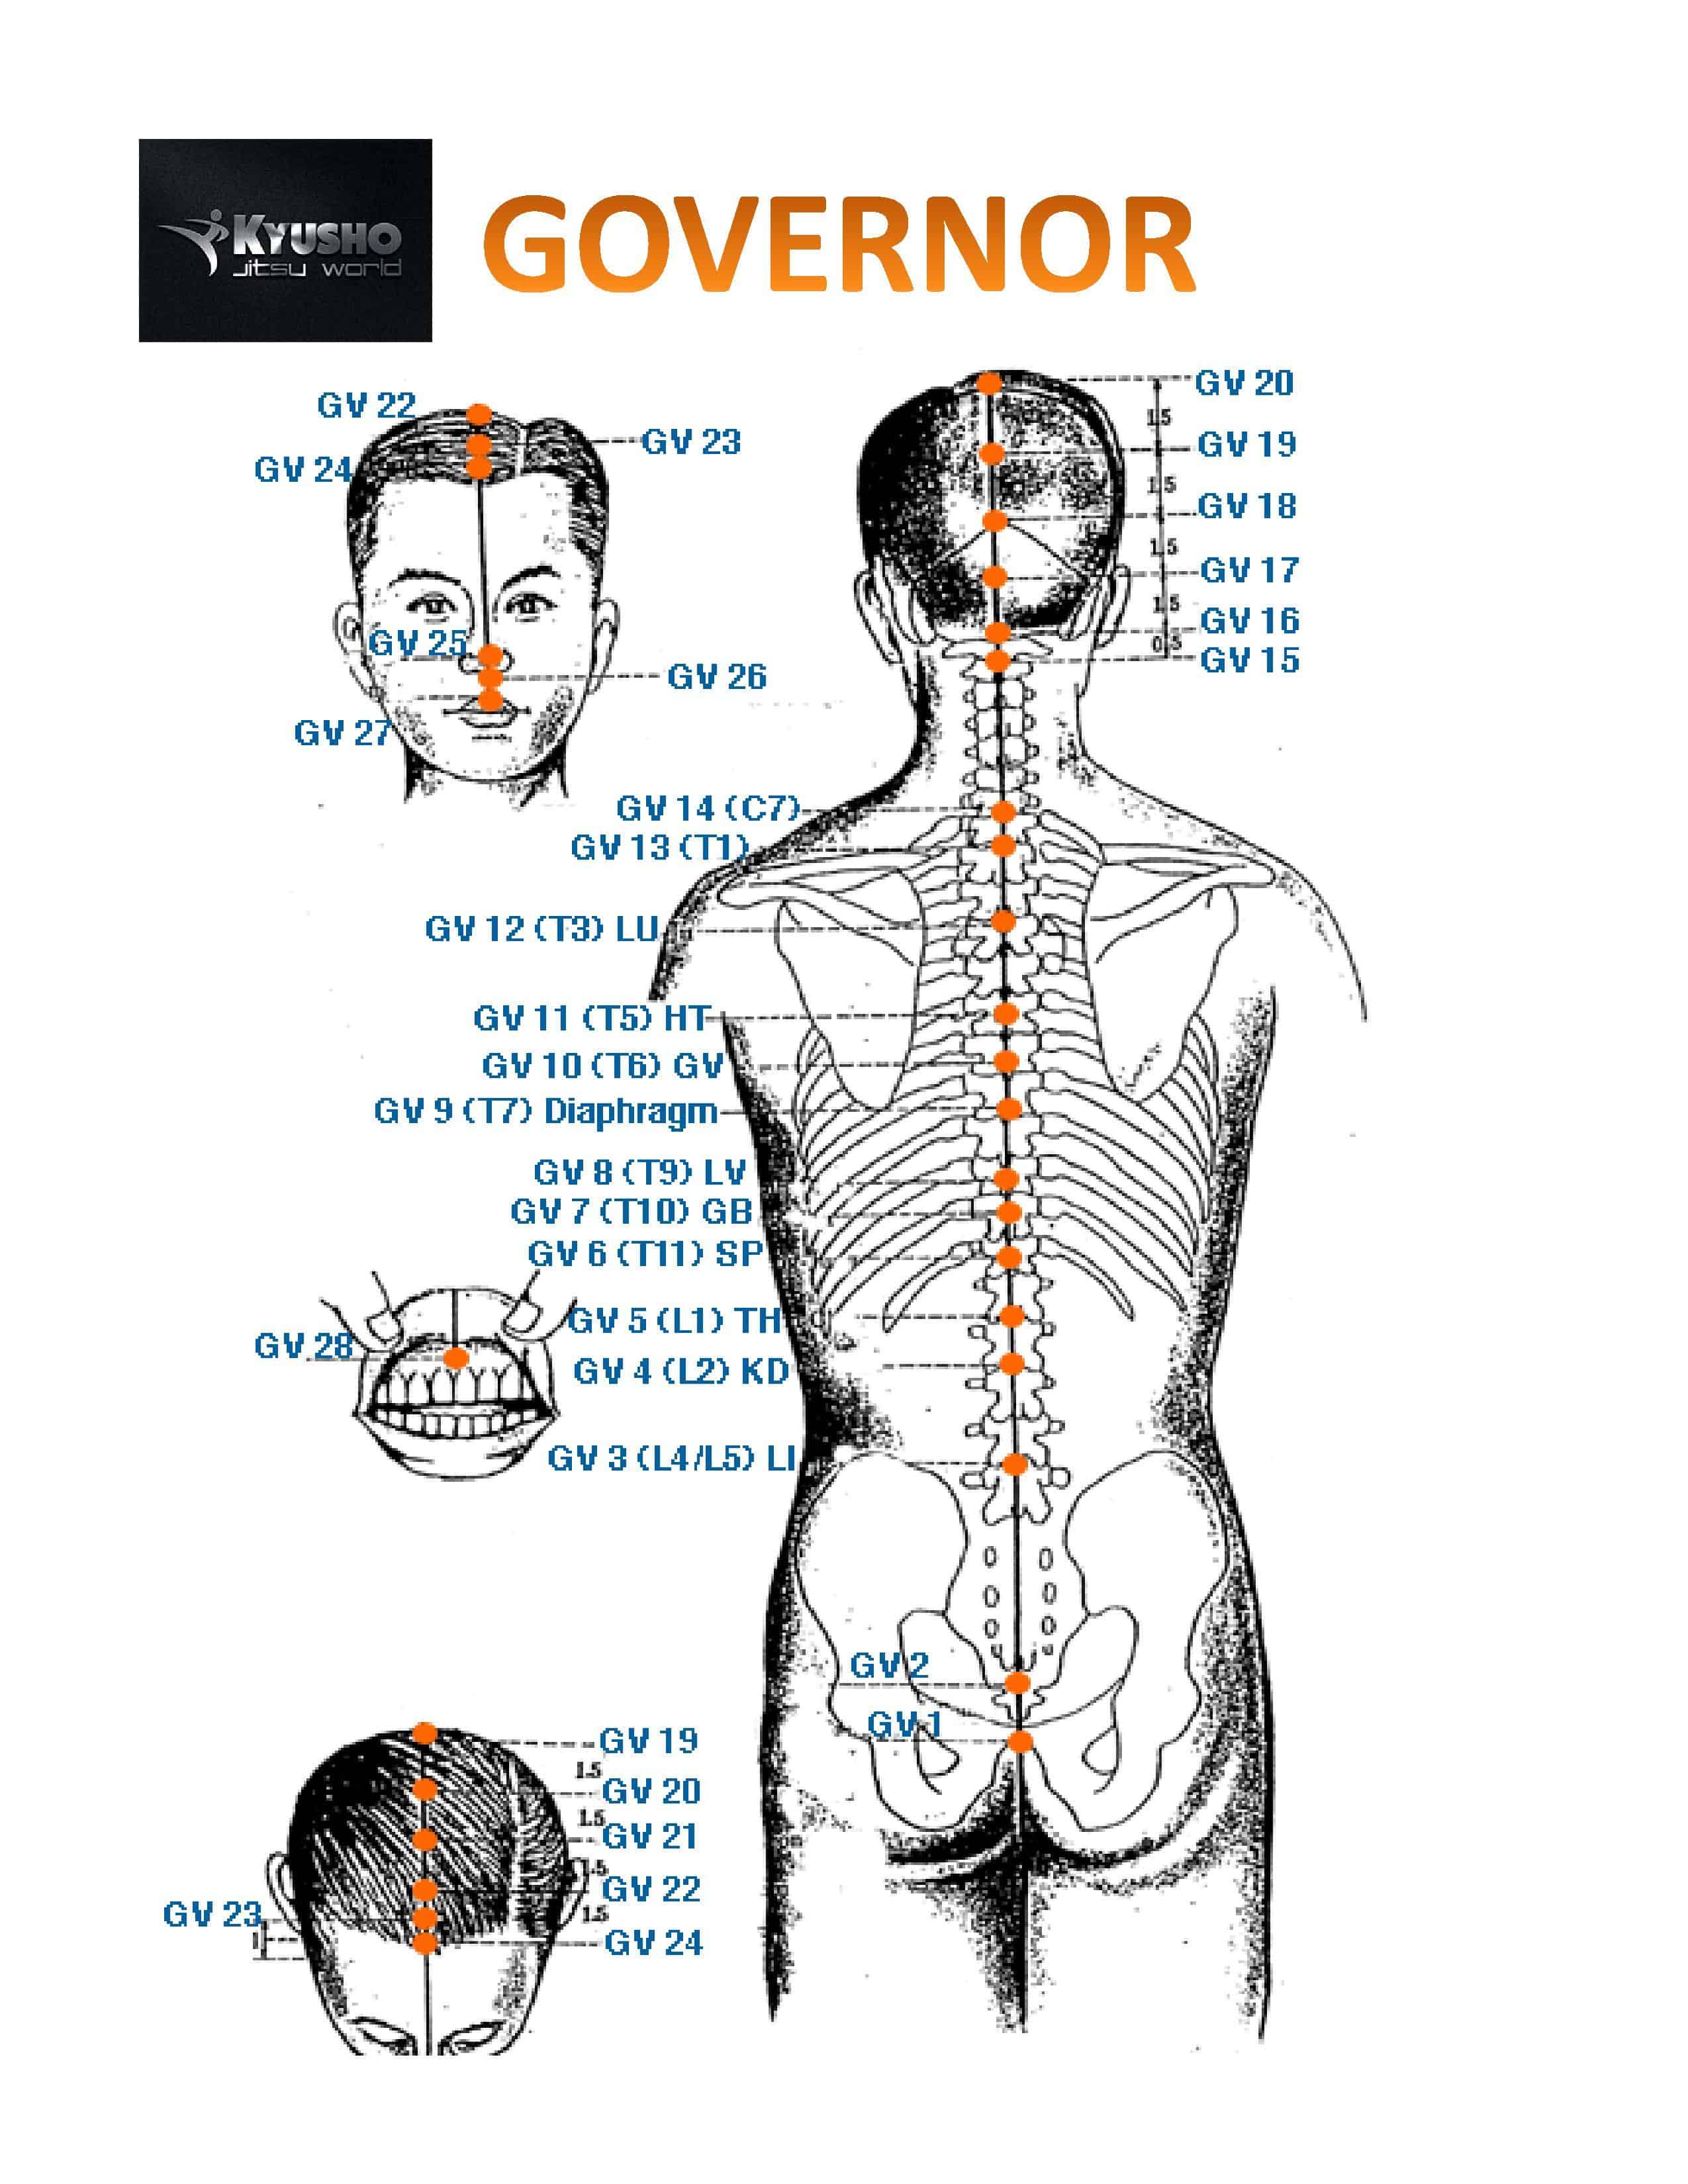 Pressure Point Governor Vessel 26 - A very Painful Pressure Point